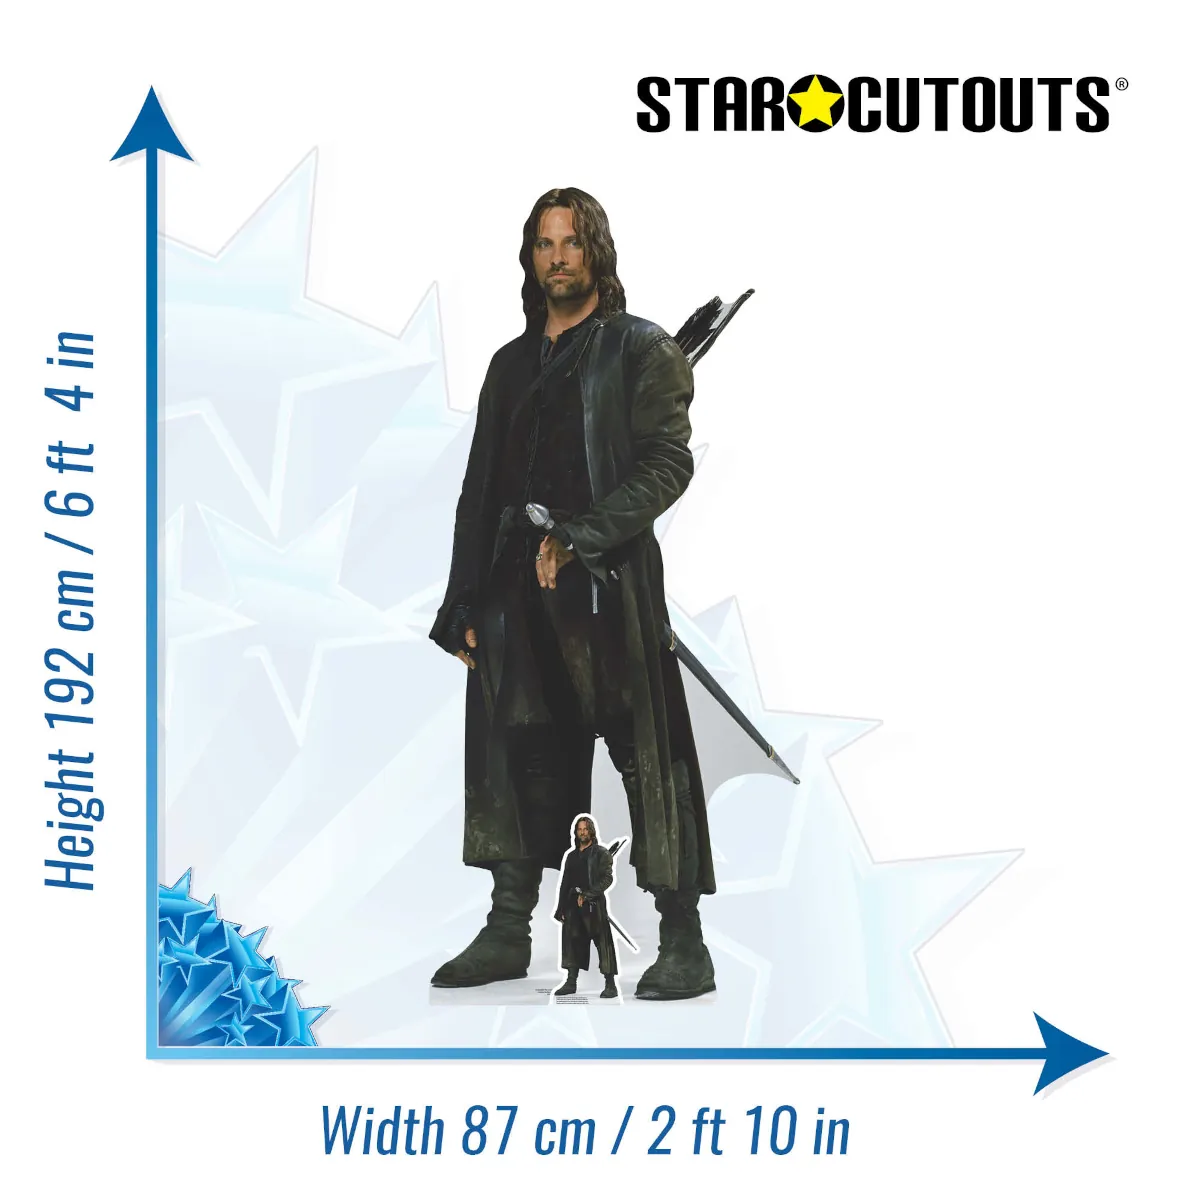 SC4130 Aragorn (The Lord of the Rings) Official Lifesize + Mini Cardboard Cutout Standee Size